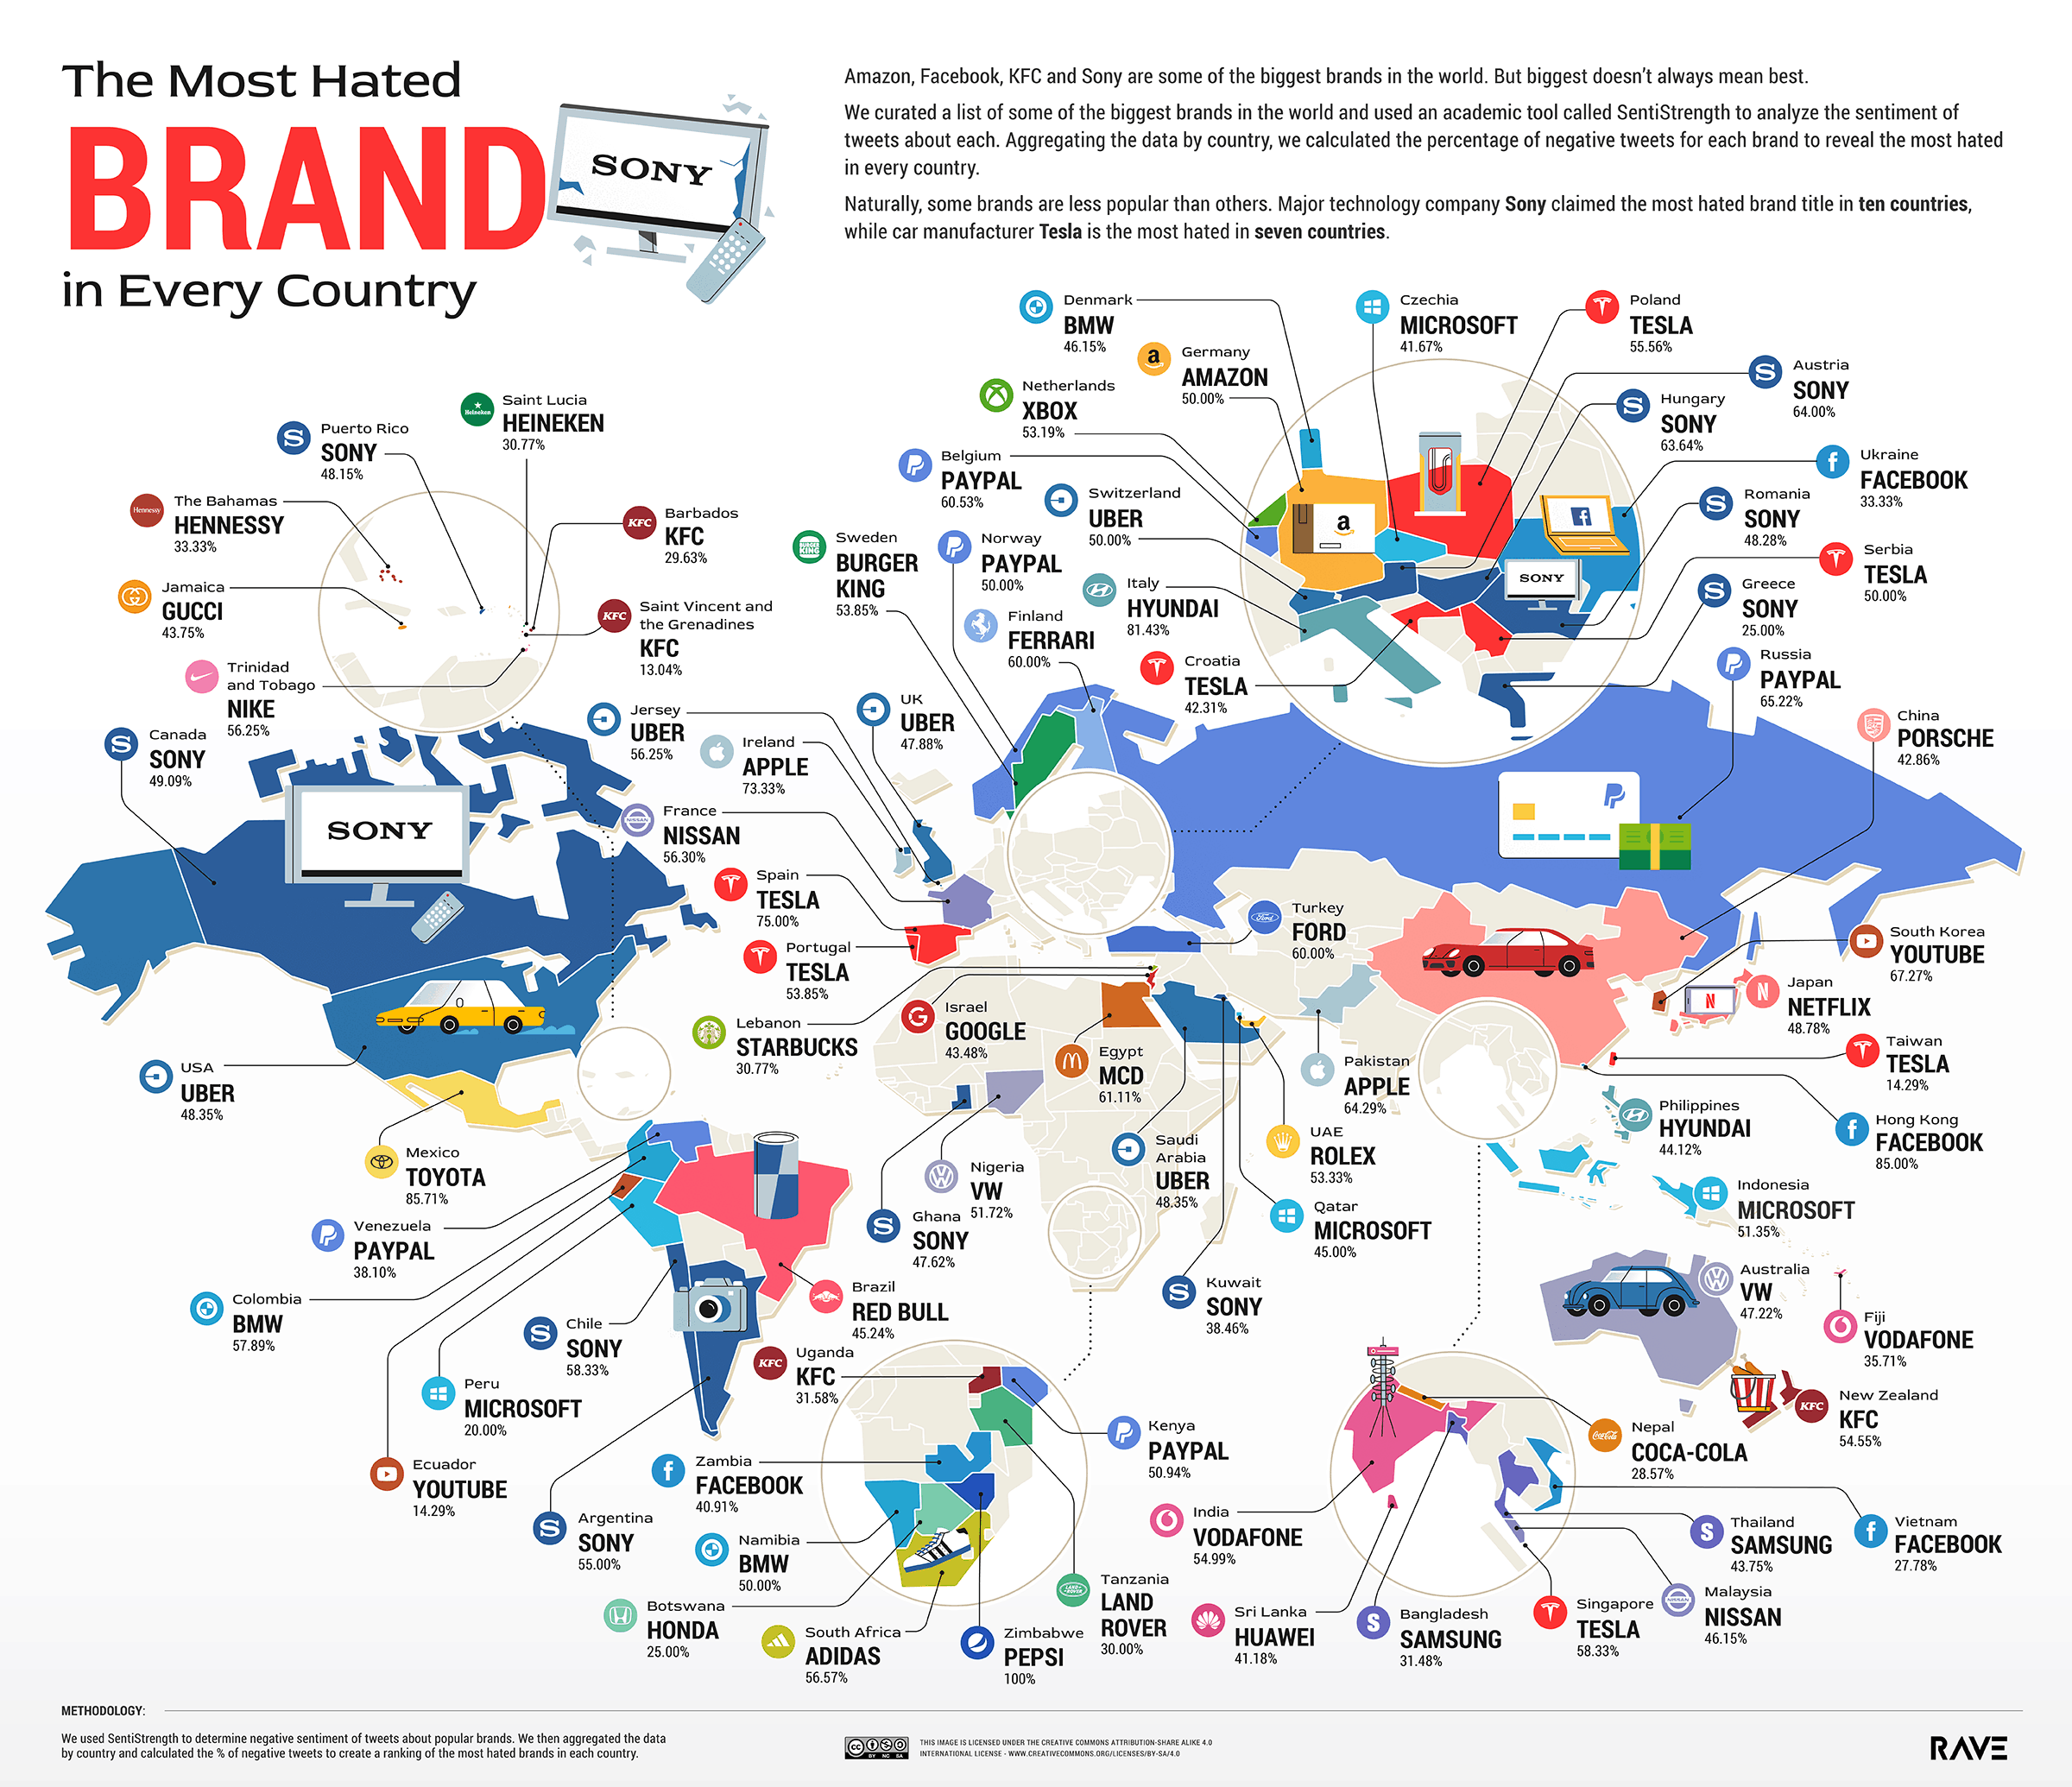 01_The-Most-Hated-Brands_World-Map_Biggest-Global-Brands_Hi-RES.png